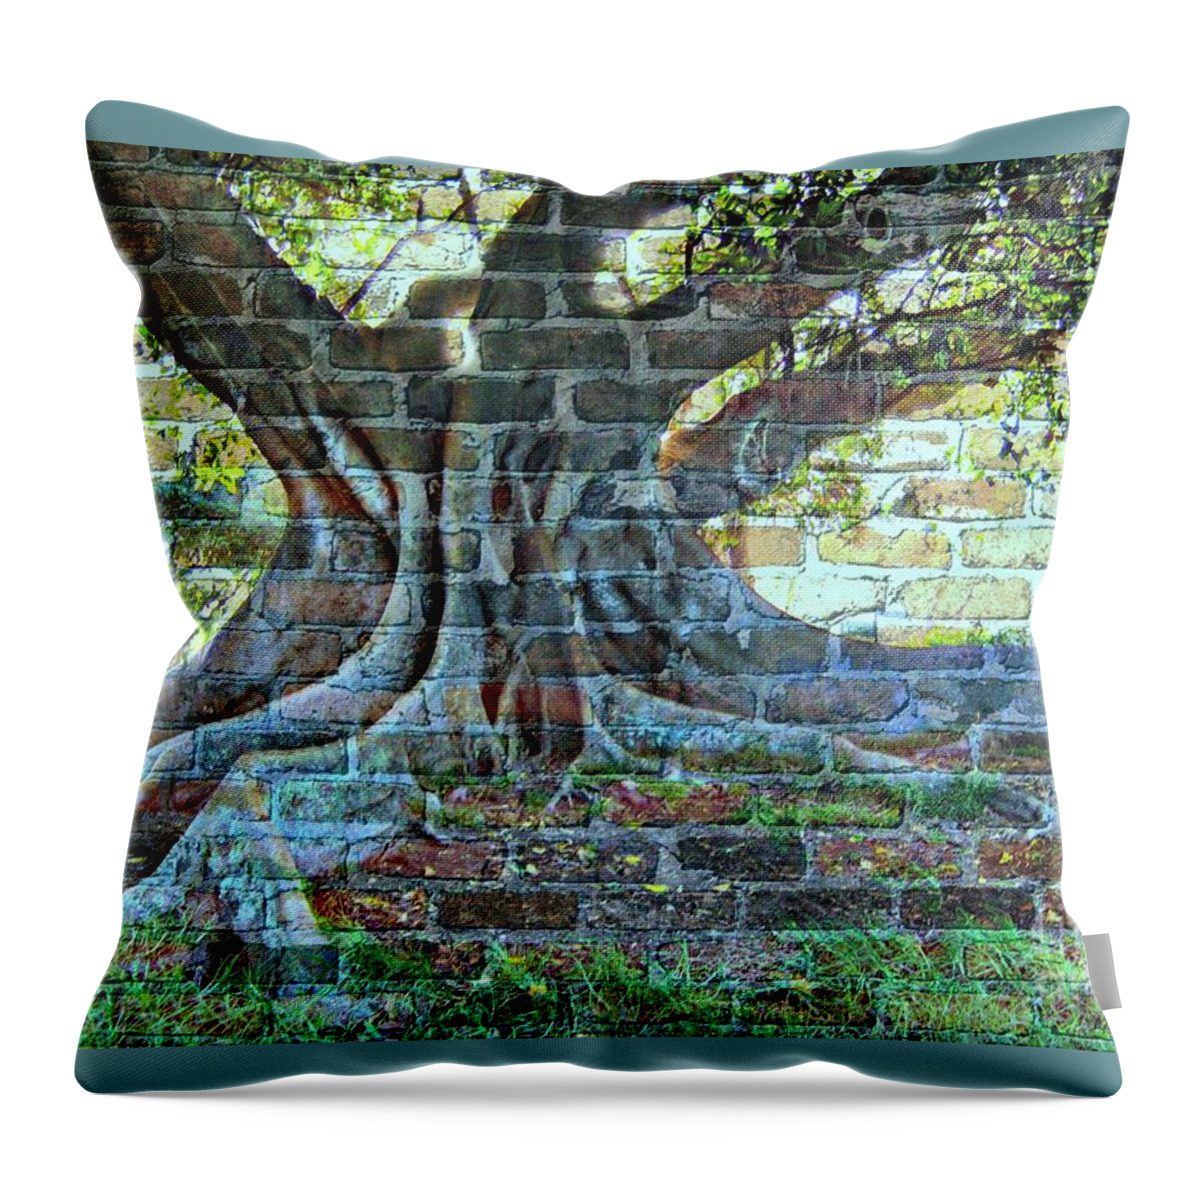 Wall Throw Pillow featuring the mixed media Tree On A Wall by Leanne Seymour